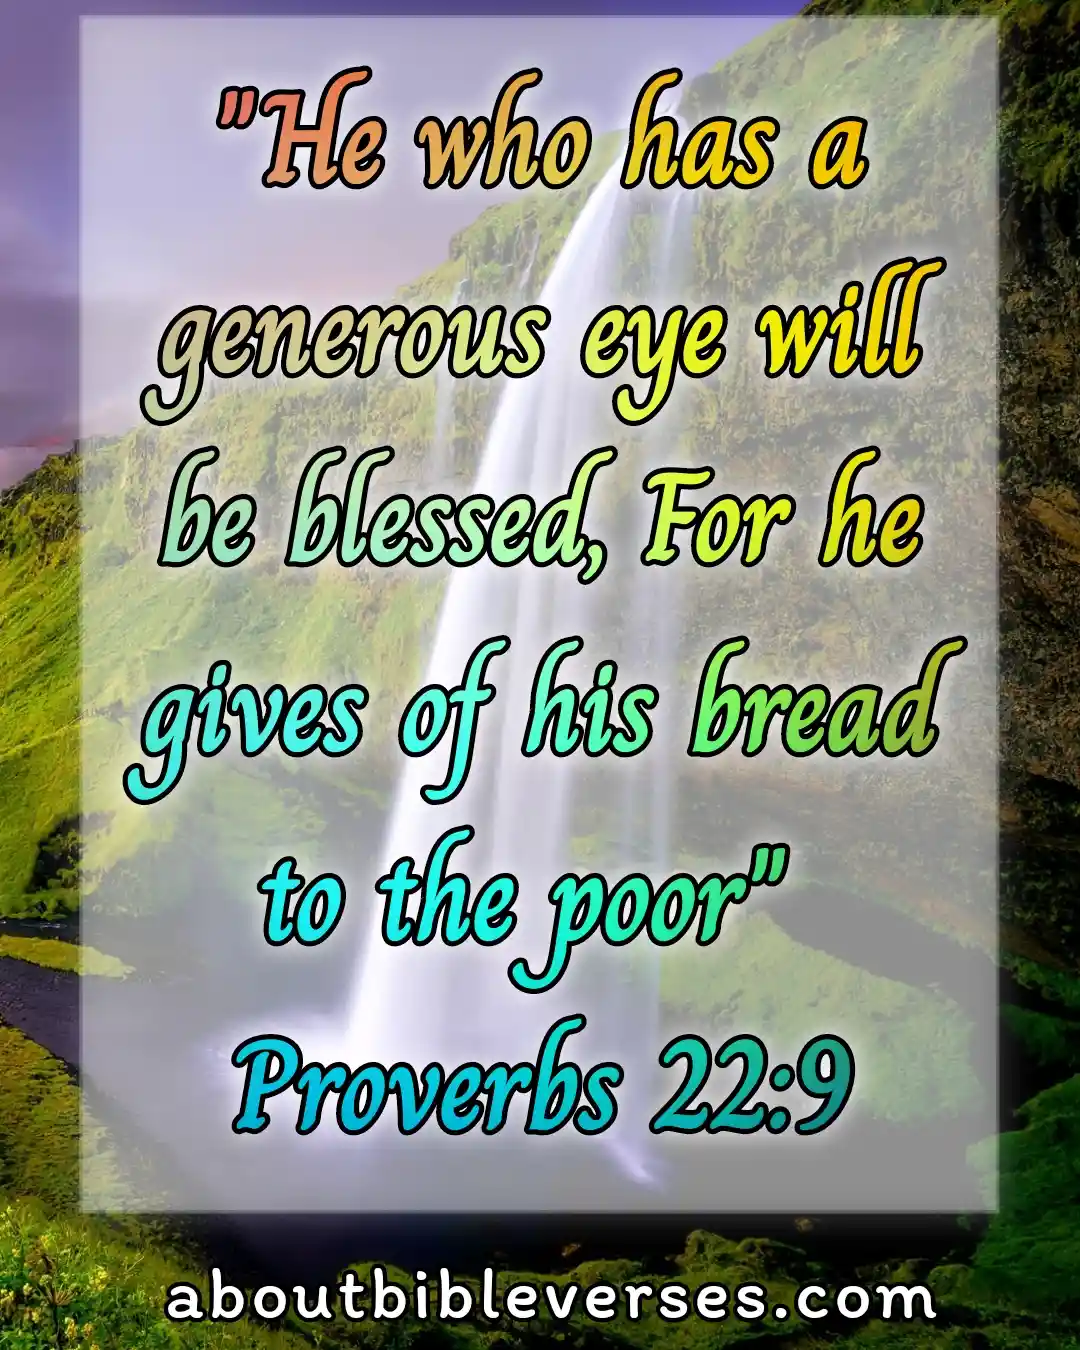 bible verses about benefits of giving alms (Proverbs 22:9)